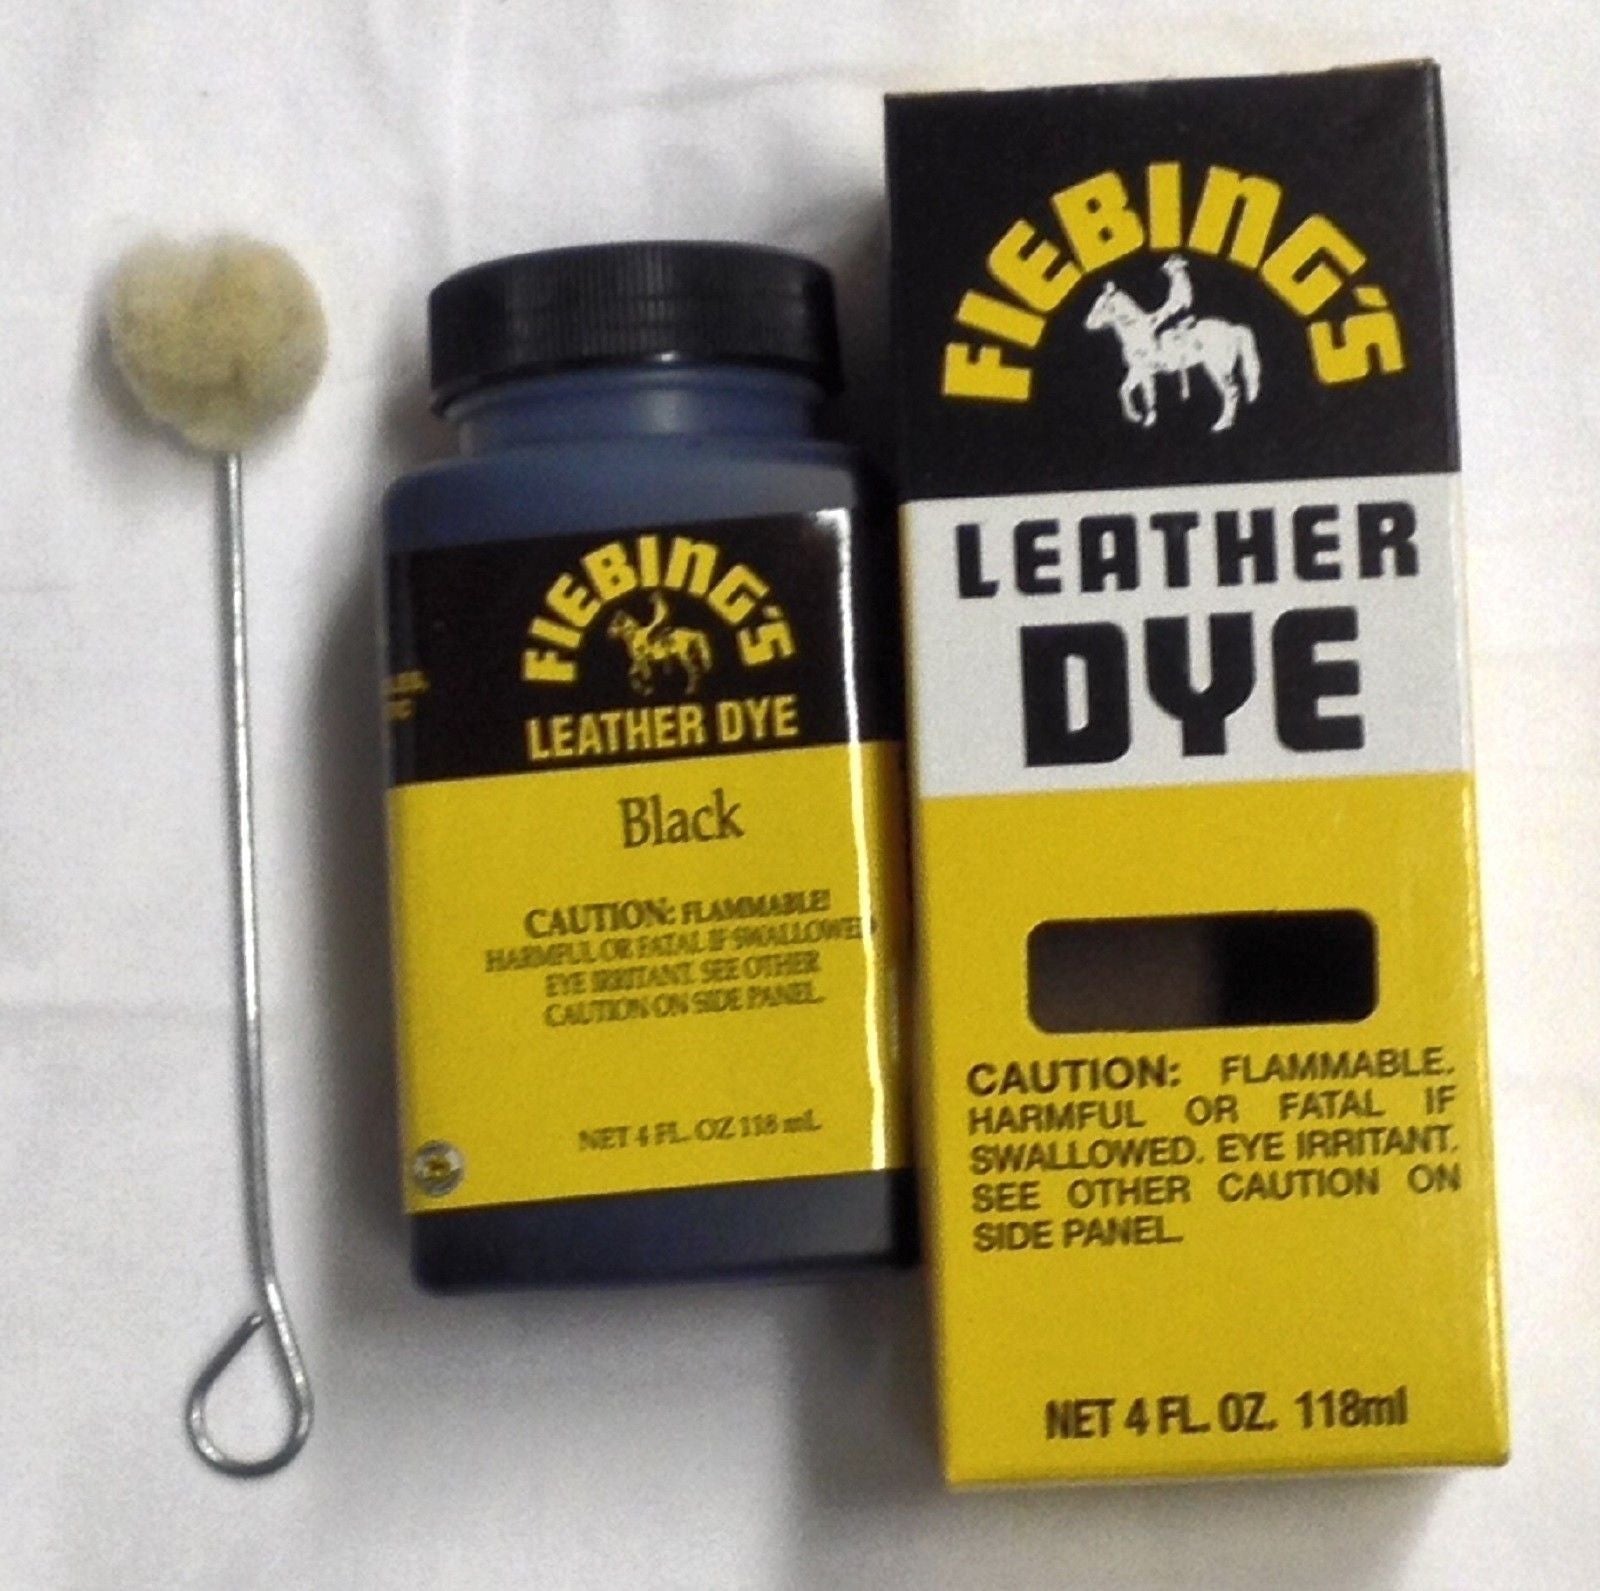 Fiebing's 4 oz Leather Dye & Applicator - Boots, Shoes, Bags